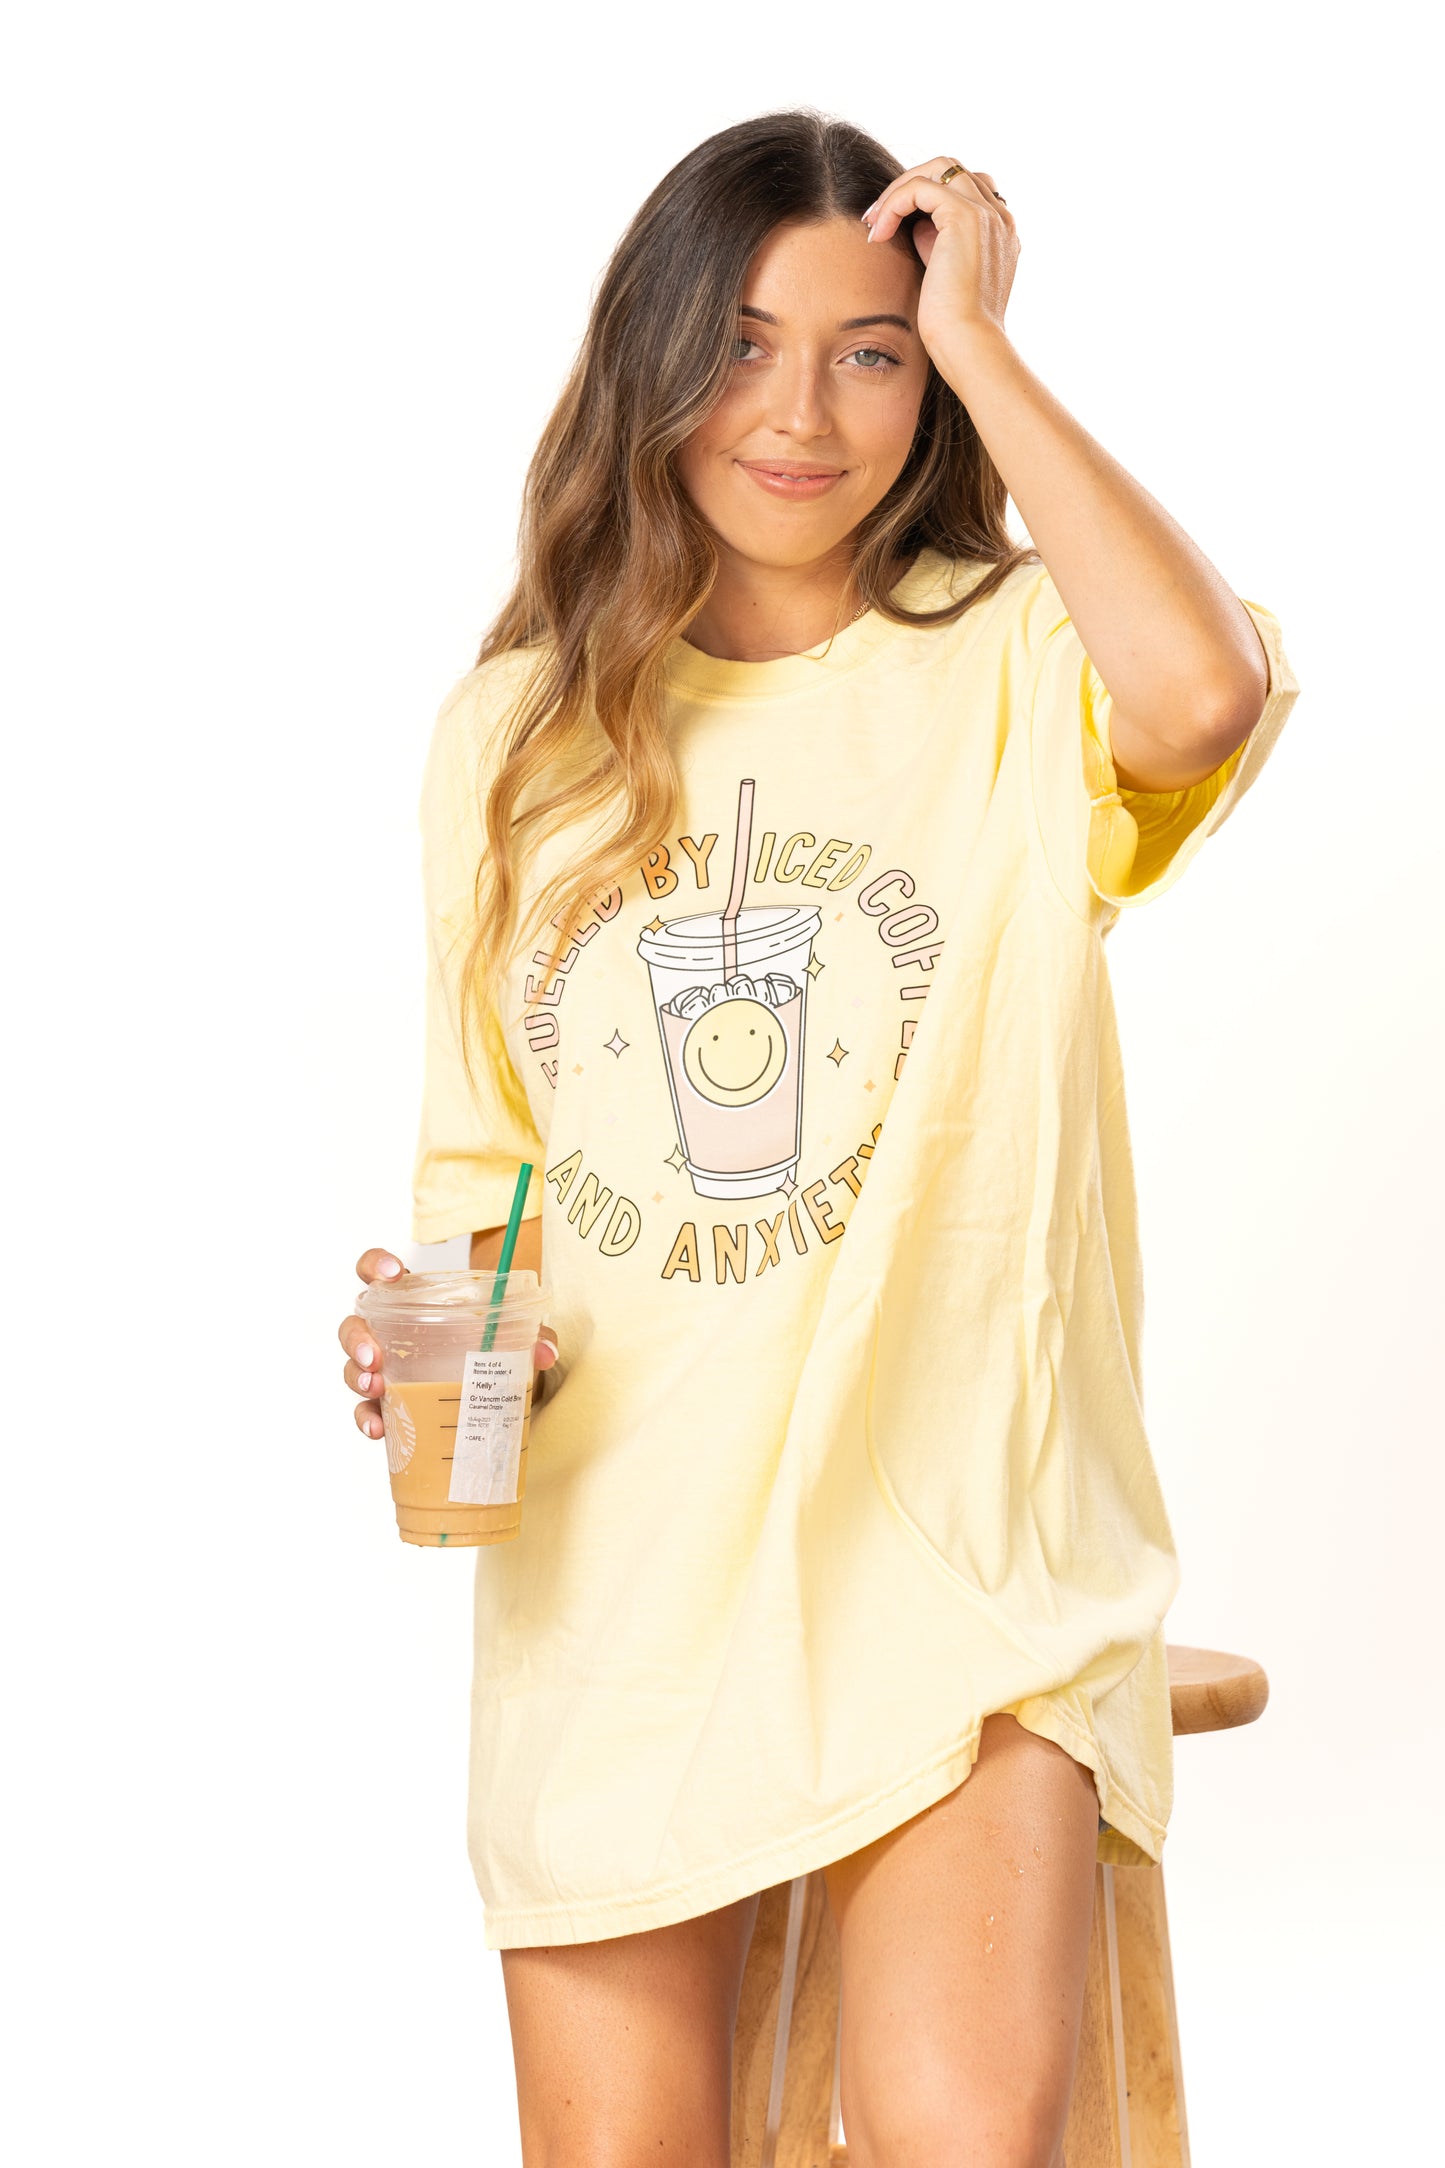 Fueled By Iced Coffee and Anxiety - Tee (Pale Yellow)